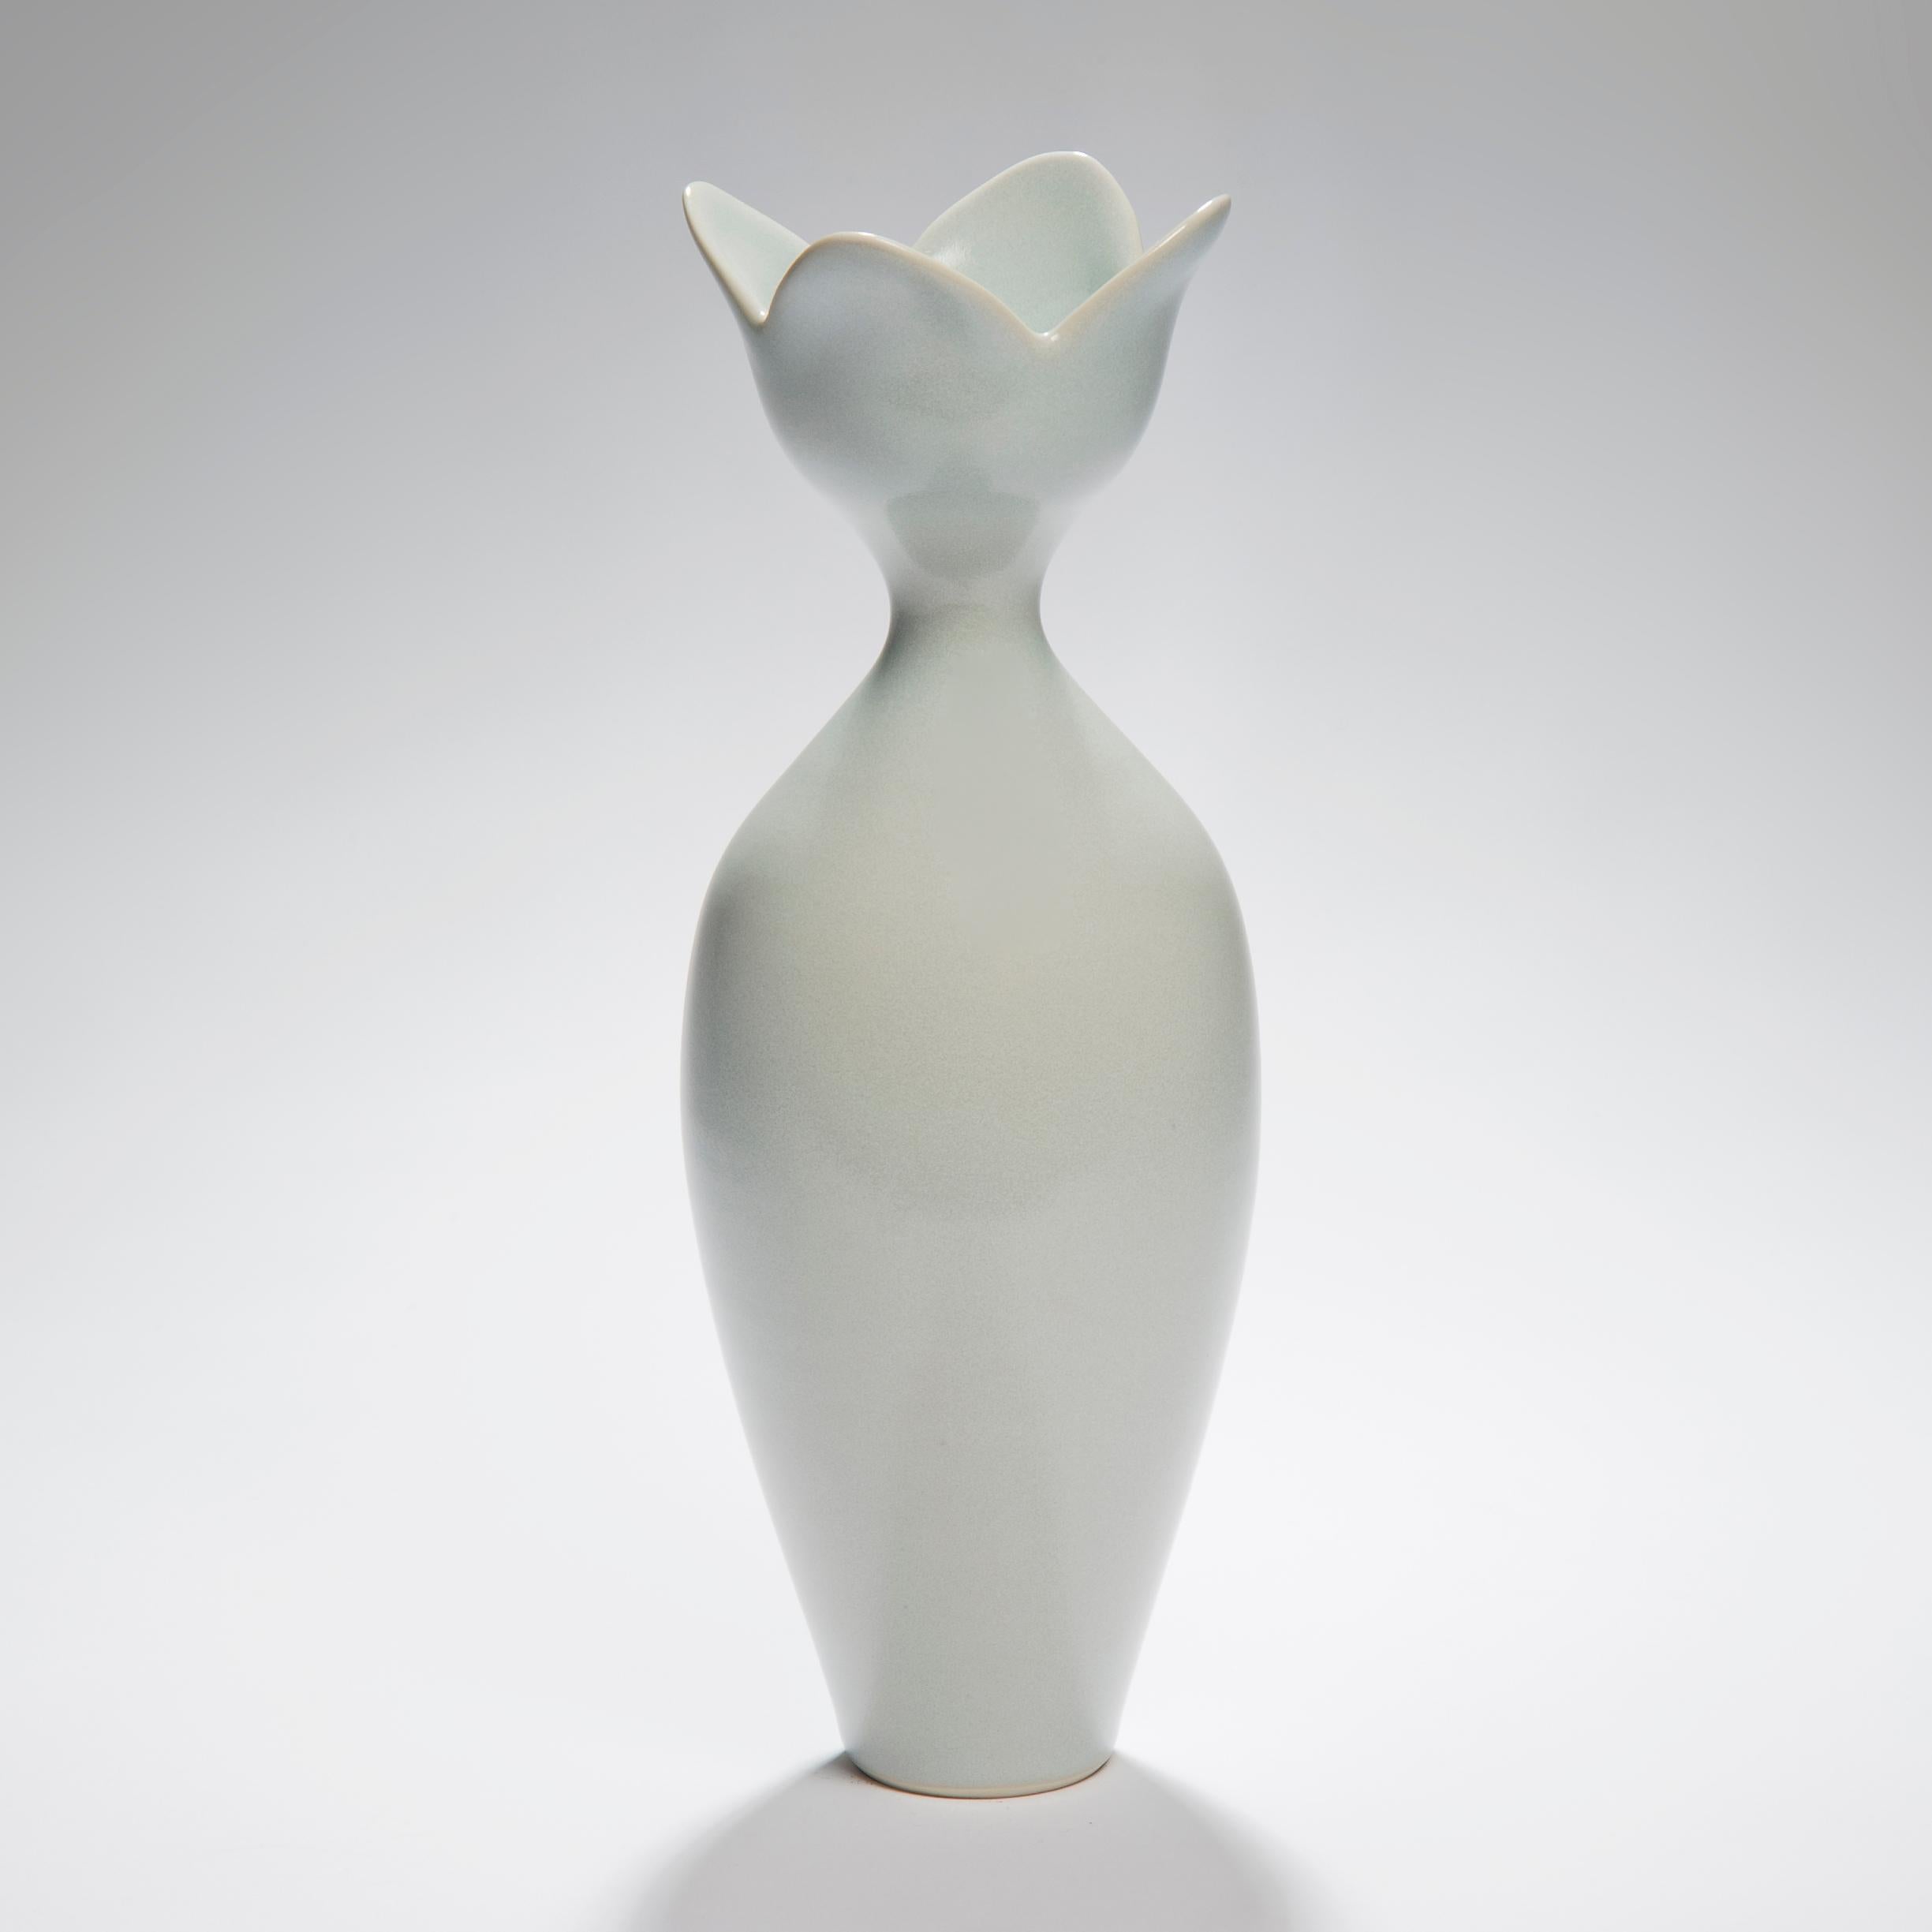 Pale blue flower, is a unique hand-thrown and glazed porcelain vase by the British artist Vivienne Foley, who produces exquisite, hand thrown, turned and glazed one-off pieces of ceramic sculpture. Although in essence they are often functional